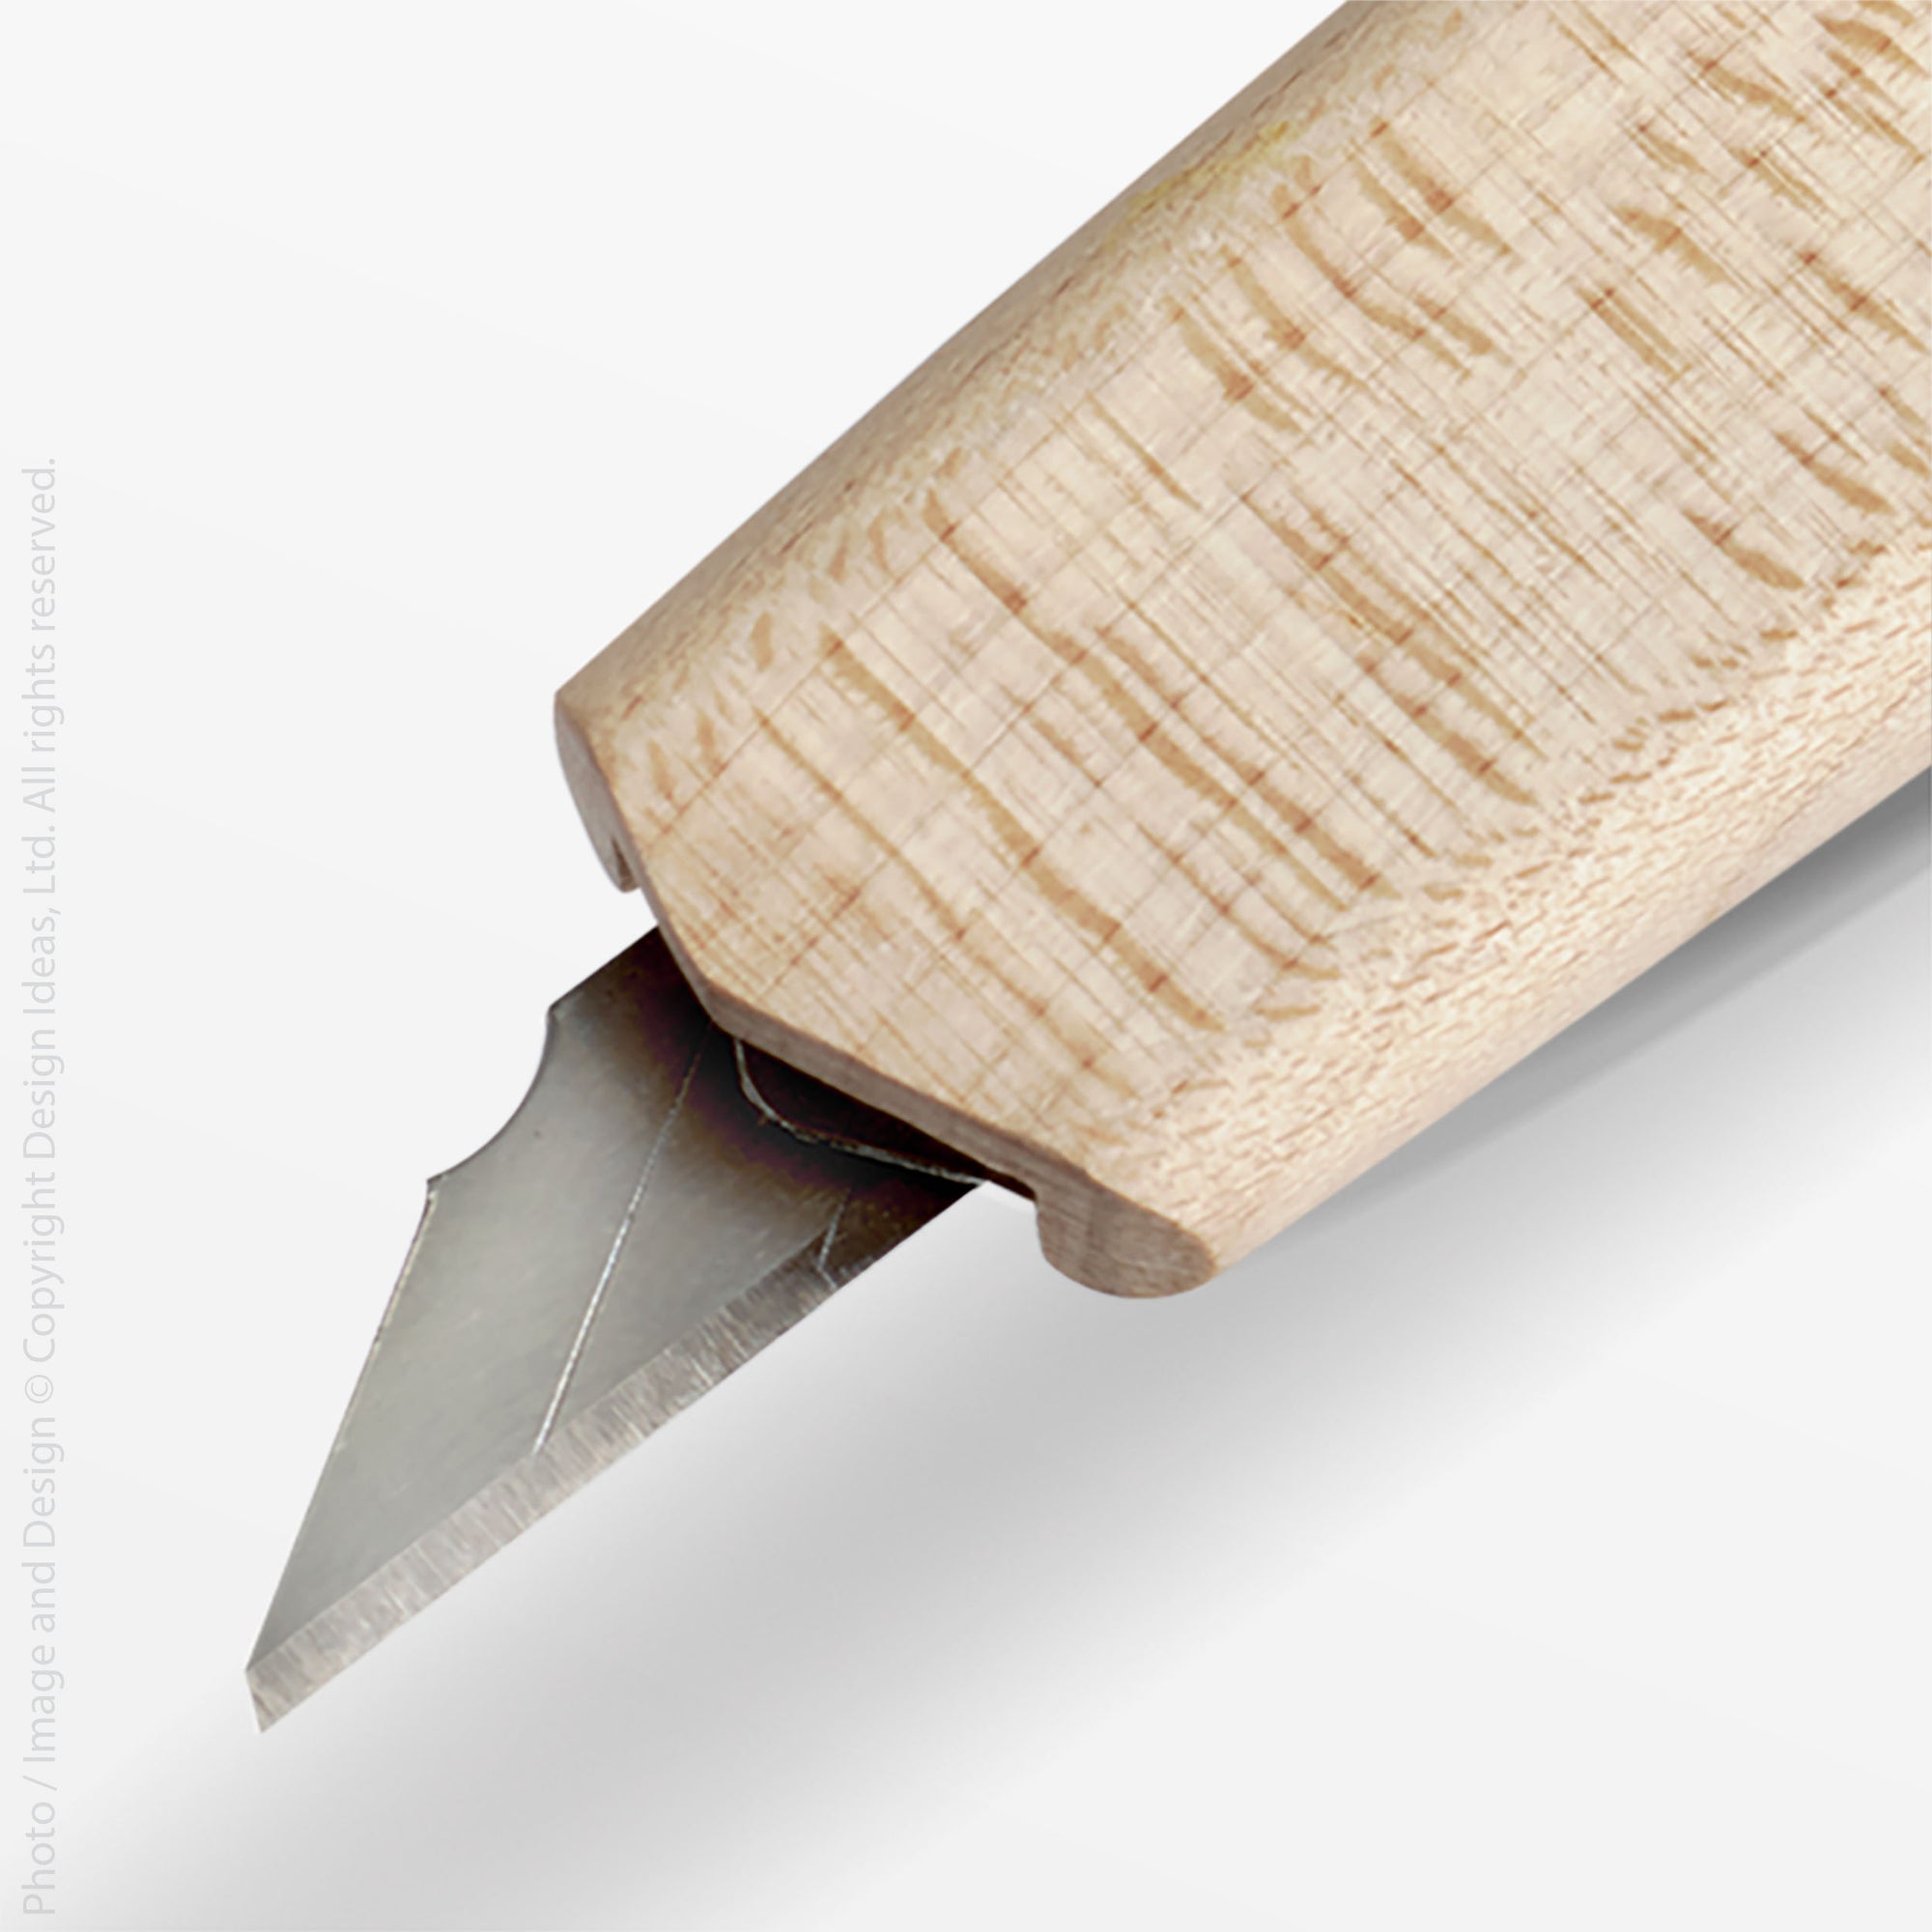 Upland™ Hand Sanded Sycamore Utility Knife